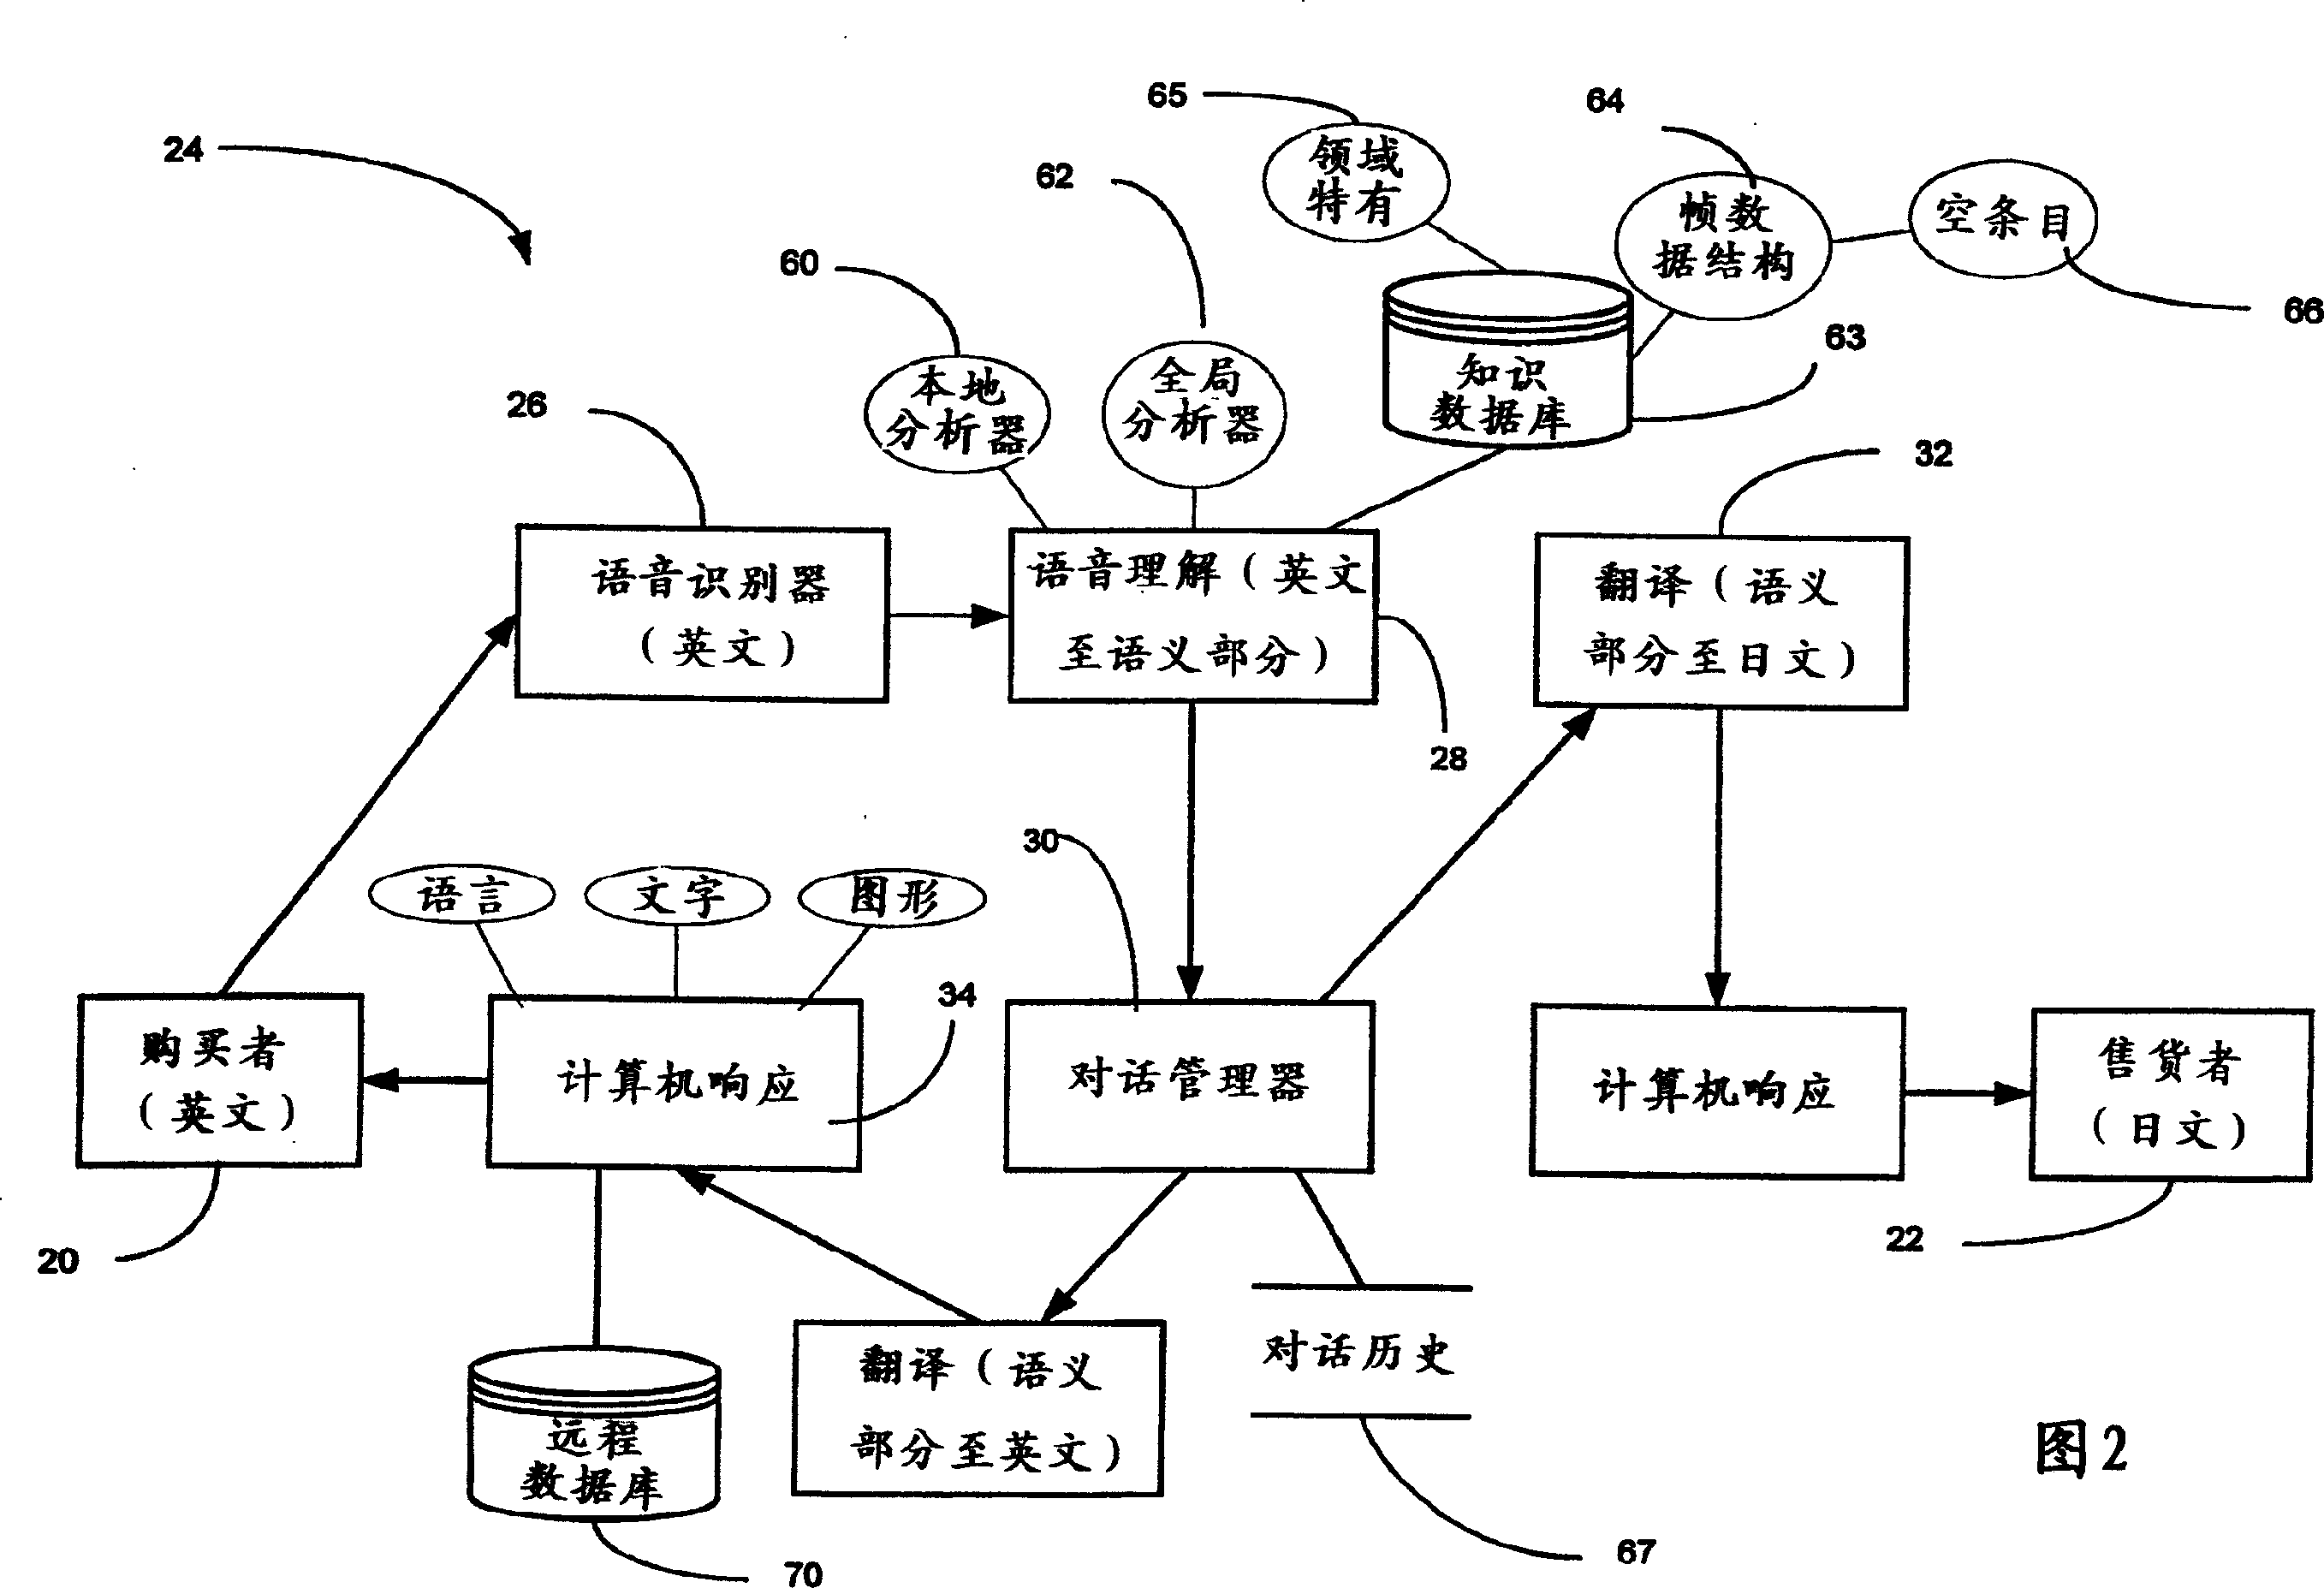 Apparatus and method for implementing language translation between speakers of different languages